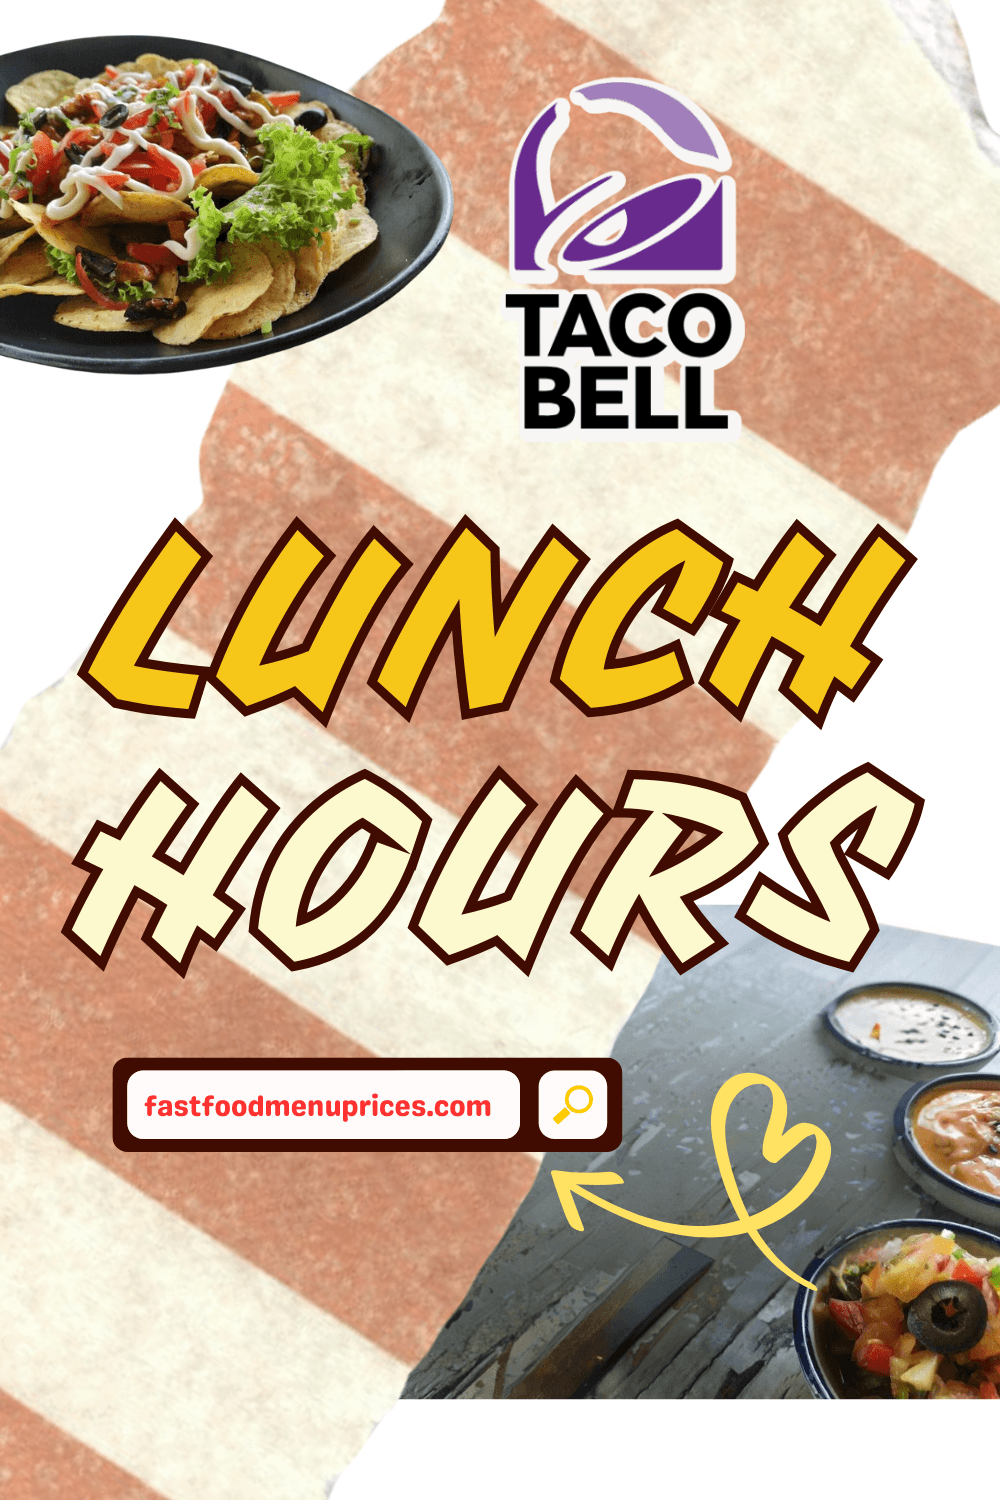 Are you wondering about Taco Bell's lunch hours or interested in uncovering the secret menu at Raising Cane's?